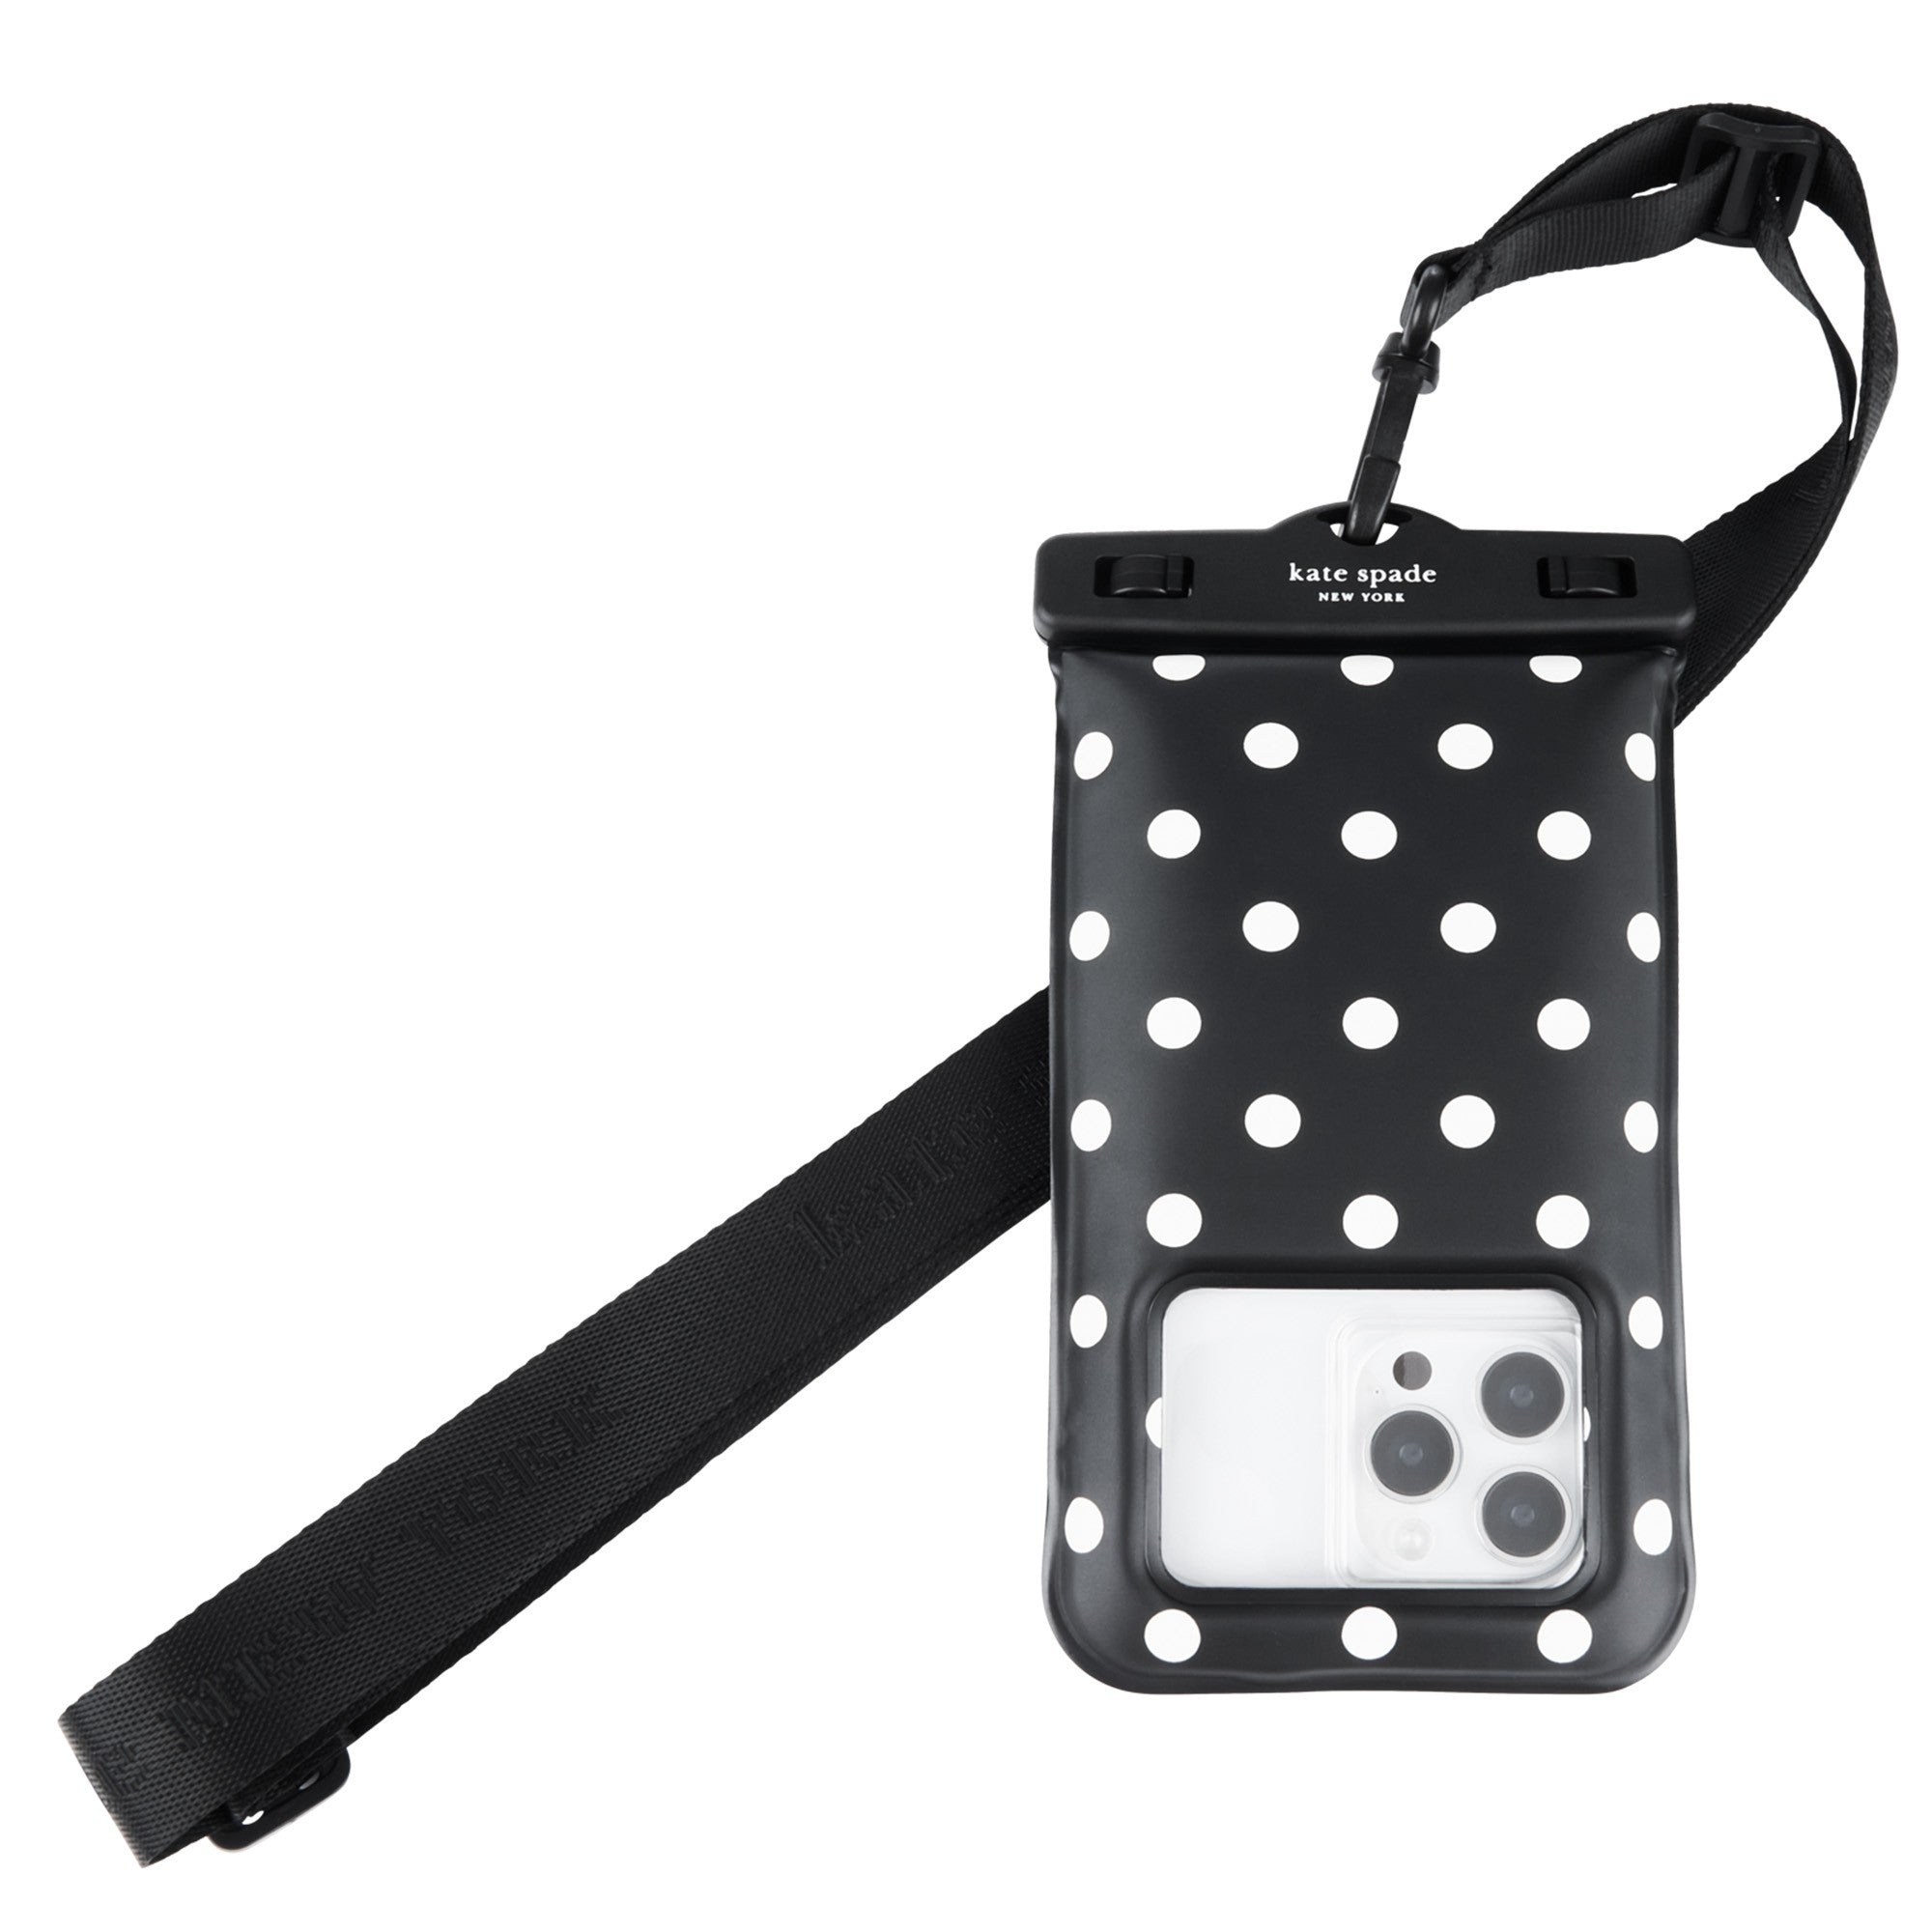 Kate Spade Waterproof Floating Pouch - Picture Dot - 15-12845